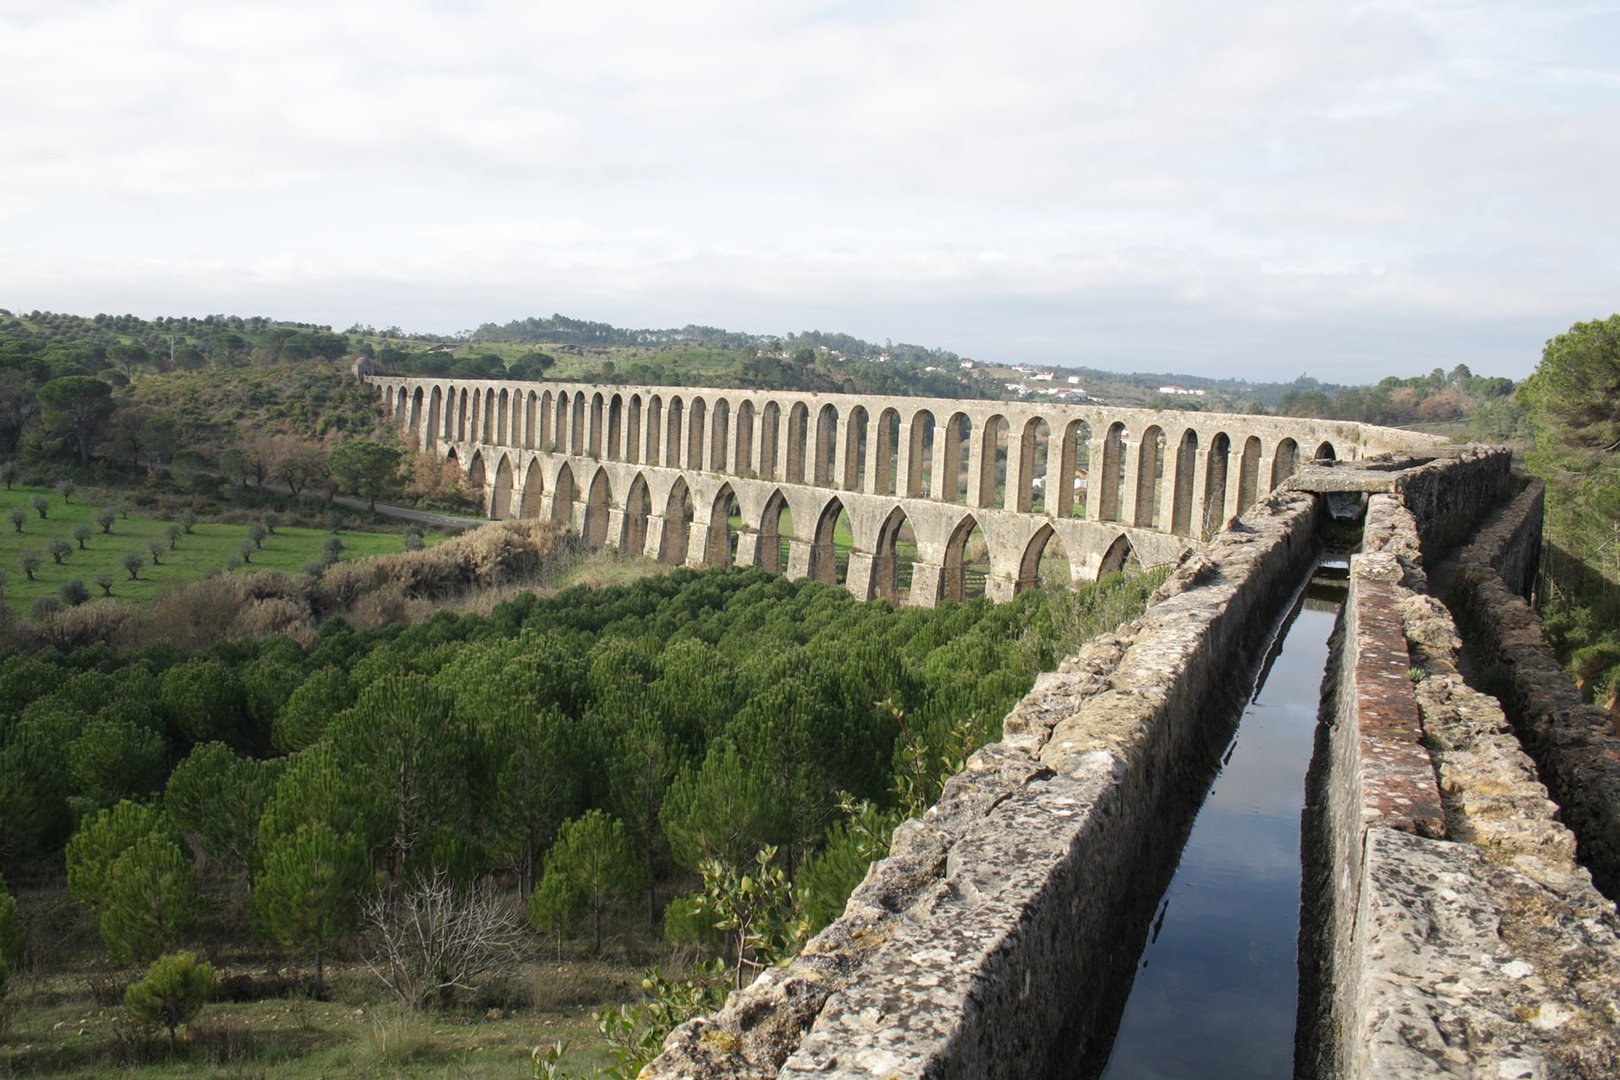 The Aqueduct extends over approximately six kilometres